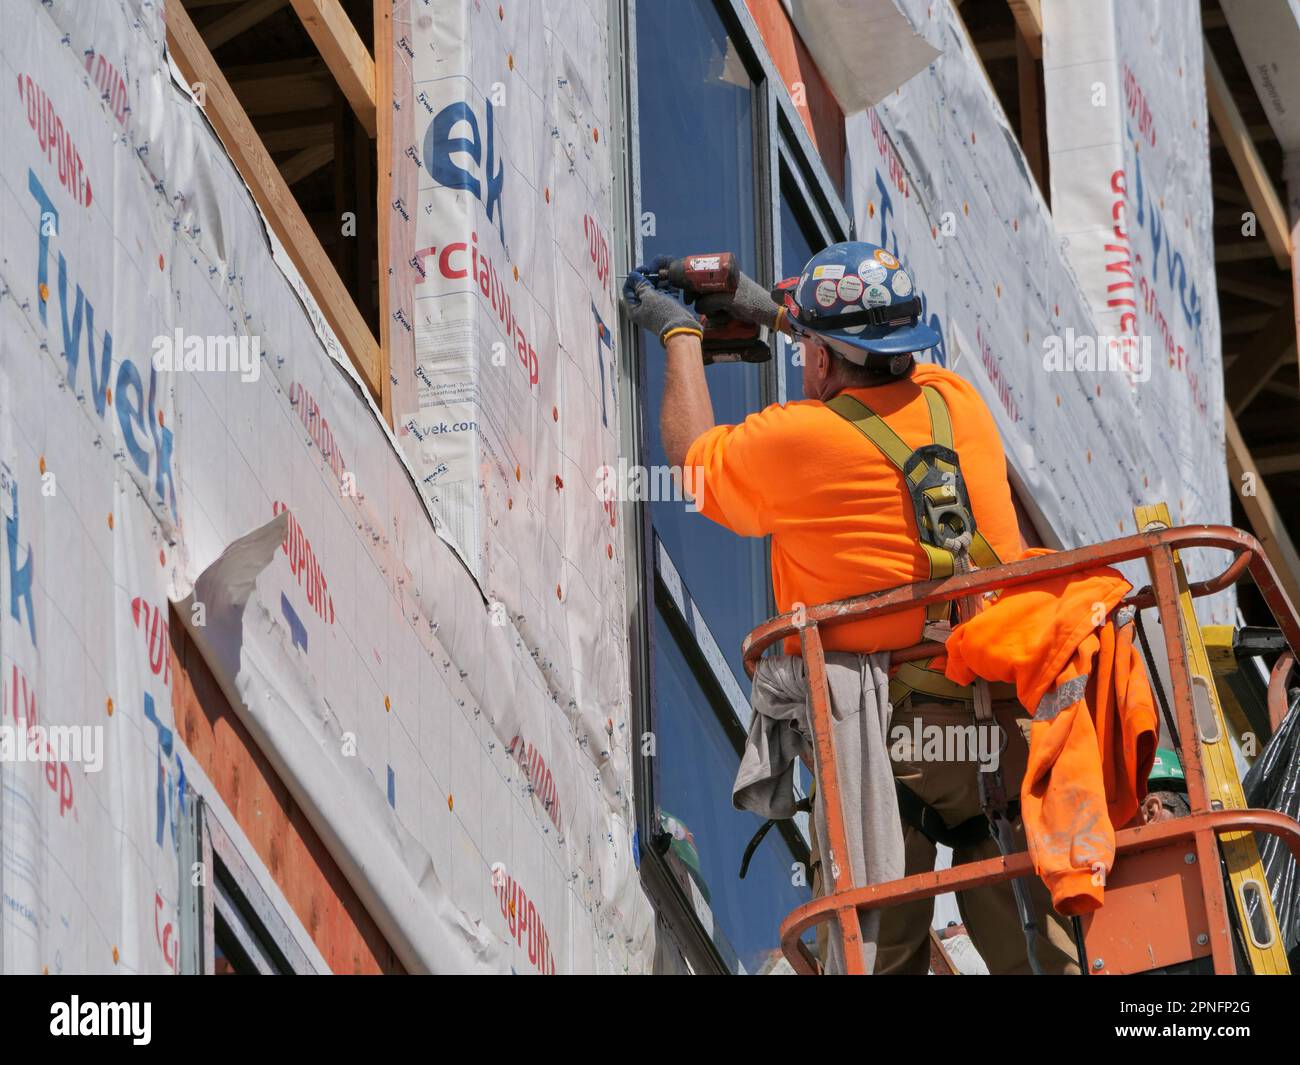 Construction workers installing window in highrise apartment building under construction. Stock Photo